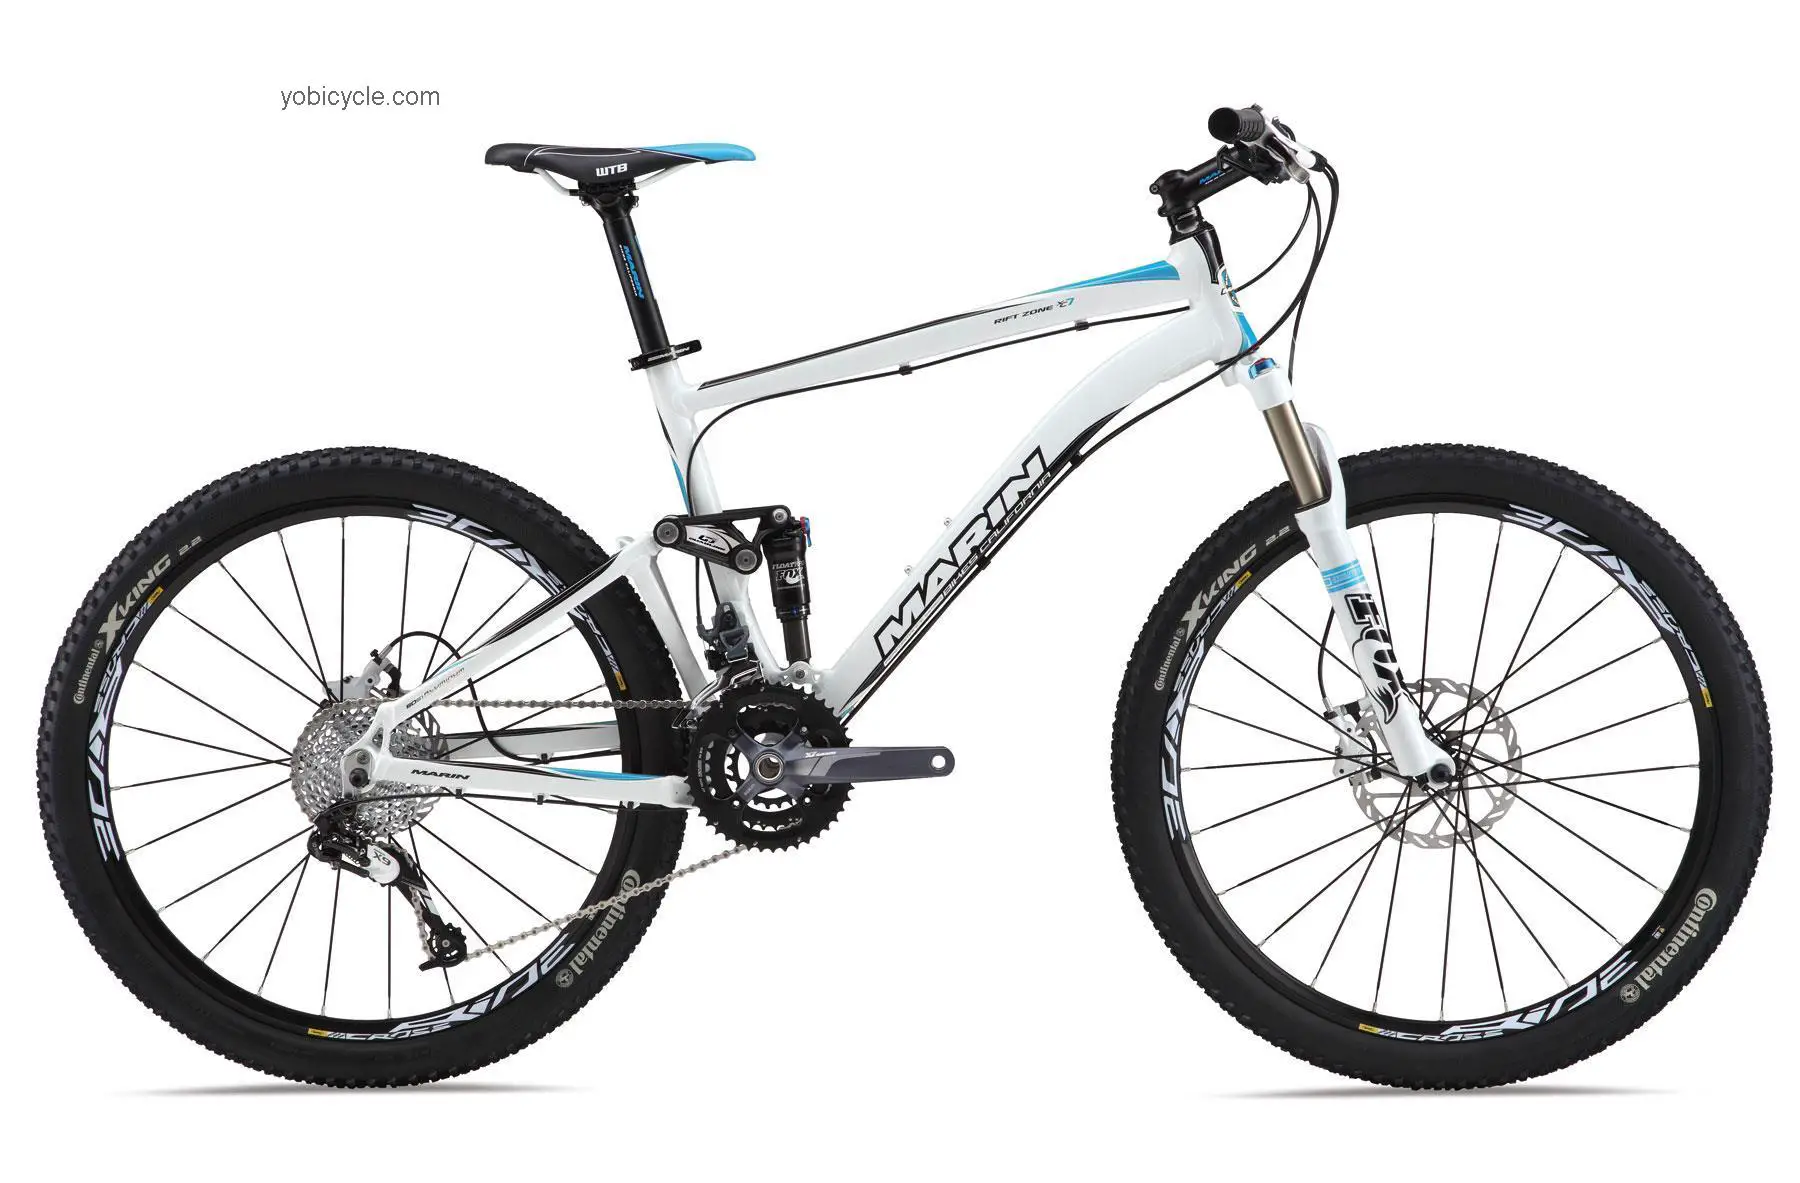 Marin Rift Zone XC7 2012 comparison online with competitors